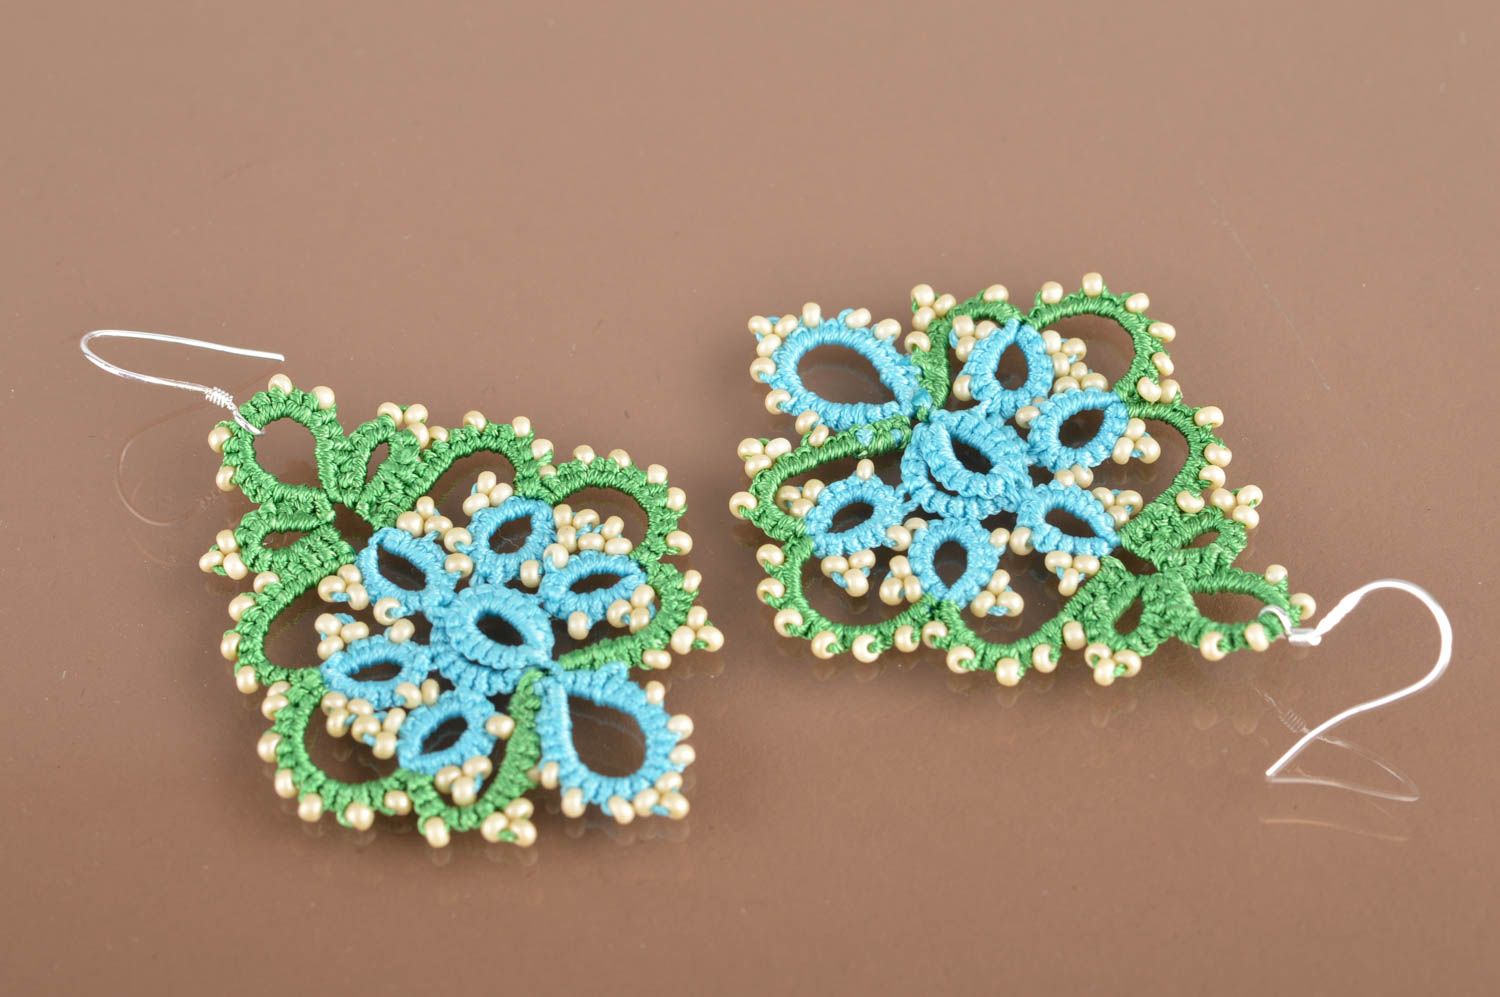 Handmade large lace drop tatted earrings woven of green and blue satin threads photo 2